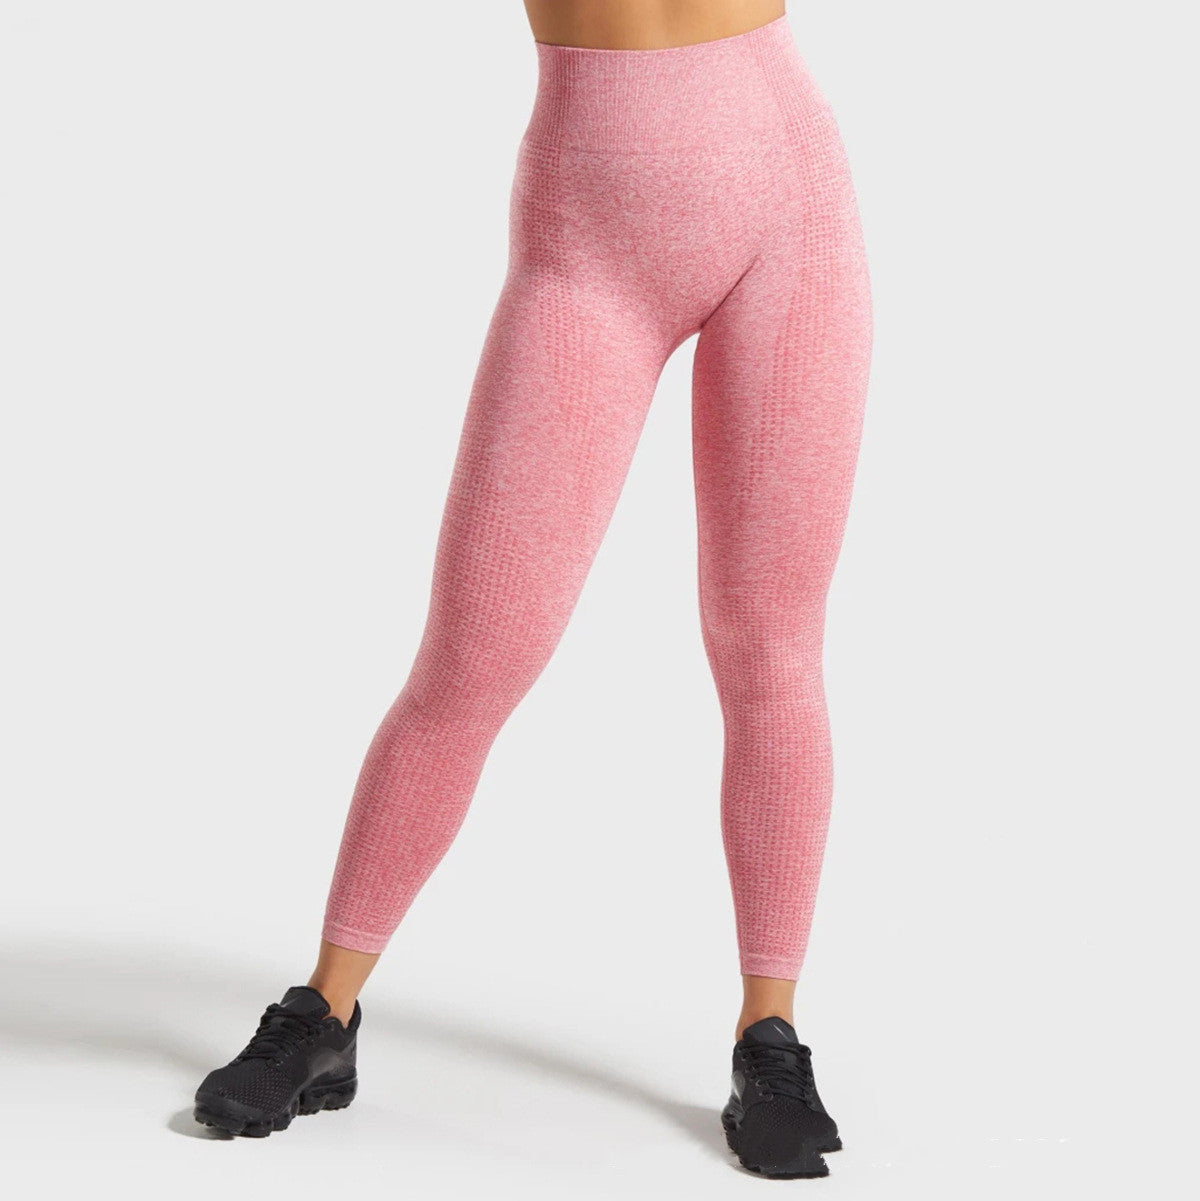 quick-drying-pants-sports-tights-fitness-pants